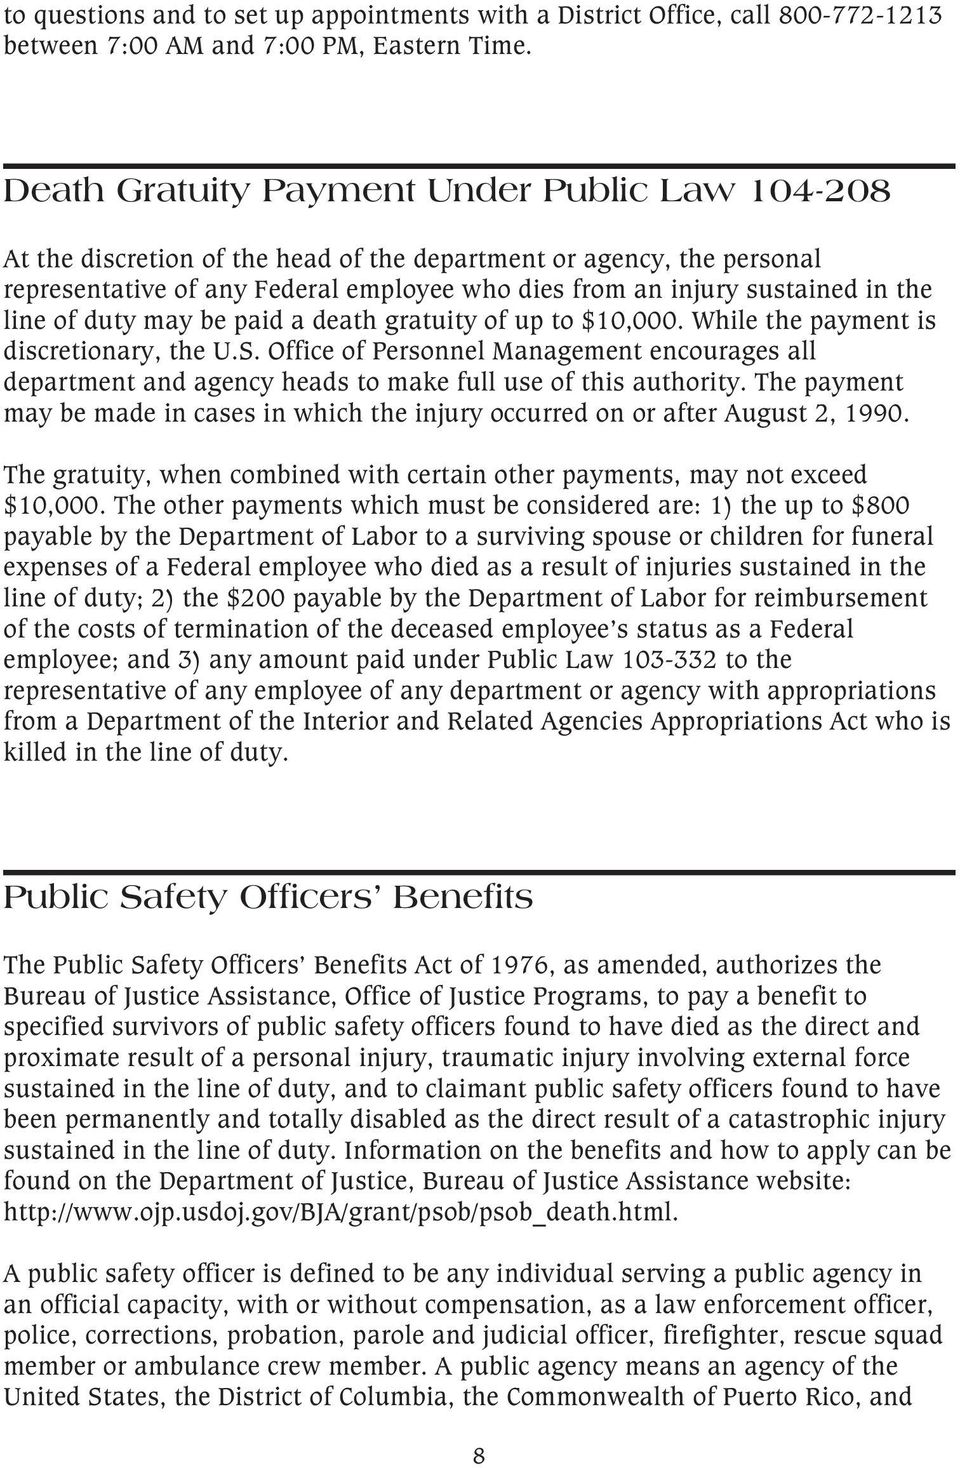 line of duty may be paid a death gratuity of up to $10,000. While the payment is discretionary, the U.S.